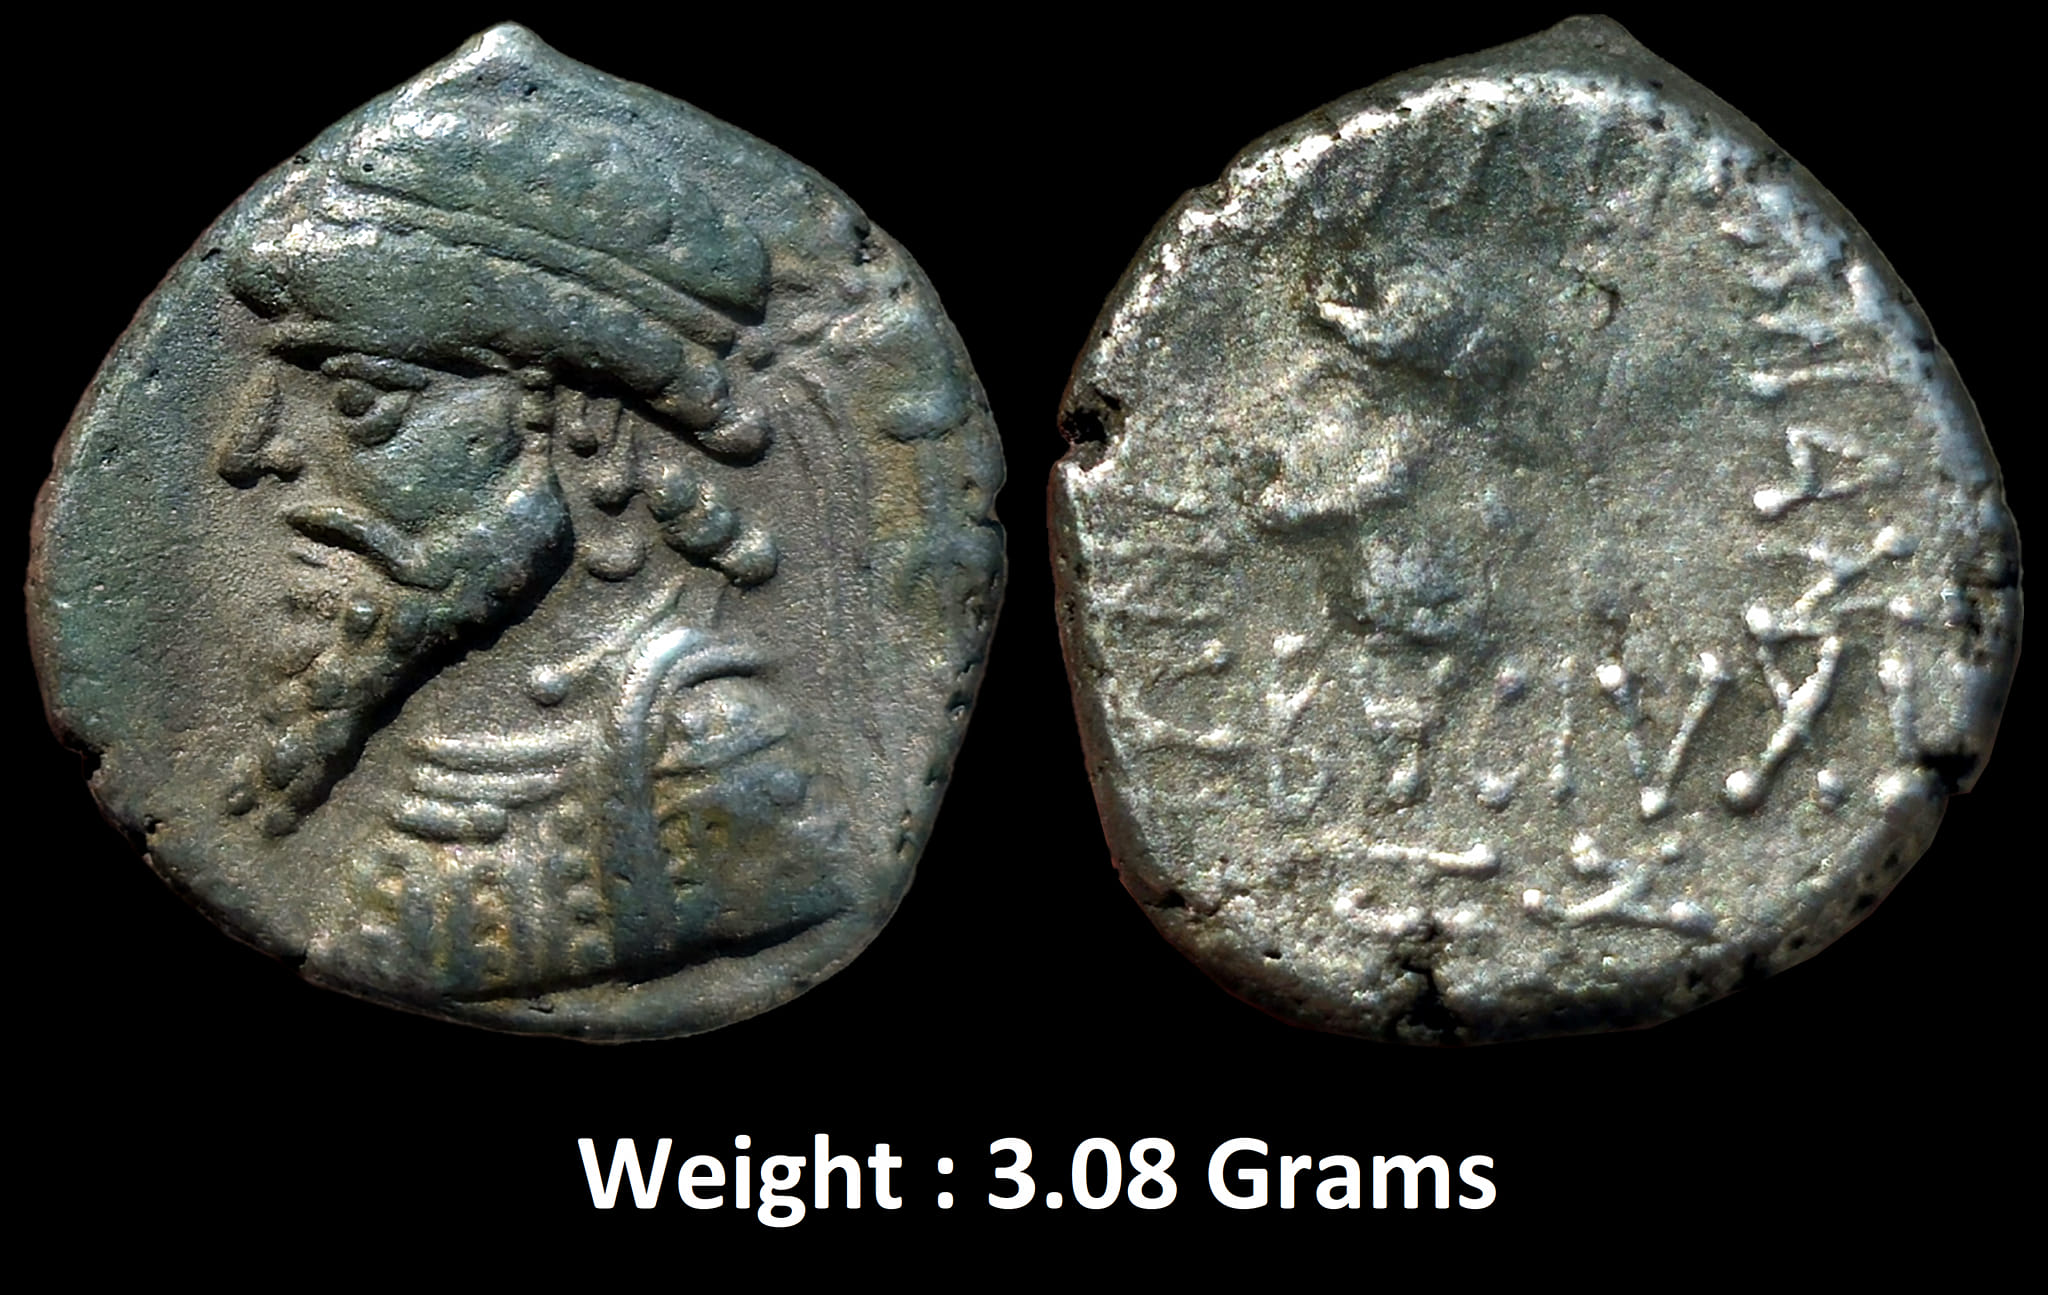 Ancient : Kings of Elymais, Kamnaskires V, 54 - 32 BC
RARE Silver Drachm, Seleukeia on the Hedyphon Mint, 16mm, 3.08 grams
Obverse: Diademed and draped bust of Kamnaskires left, star above anchor on right.
Reverse: Diademed male head left.
vant'Haaf 9.1.2-6A // Alram 464 // Sunrise 483